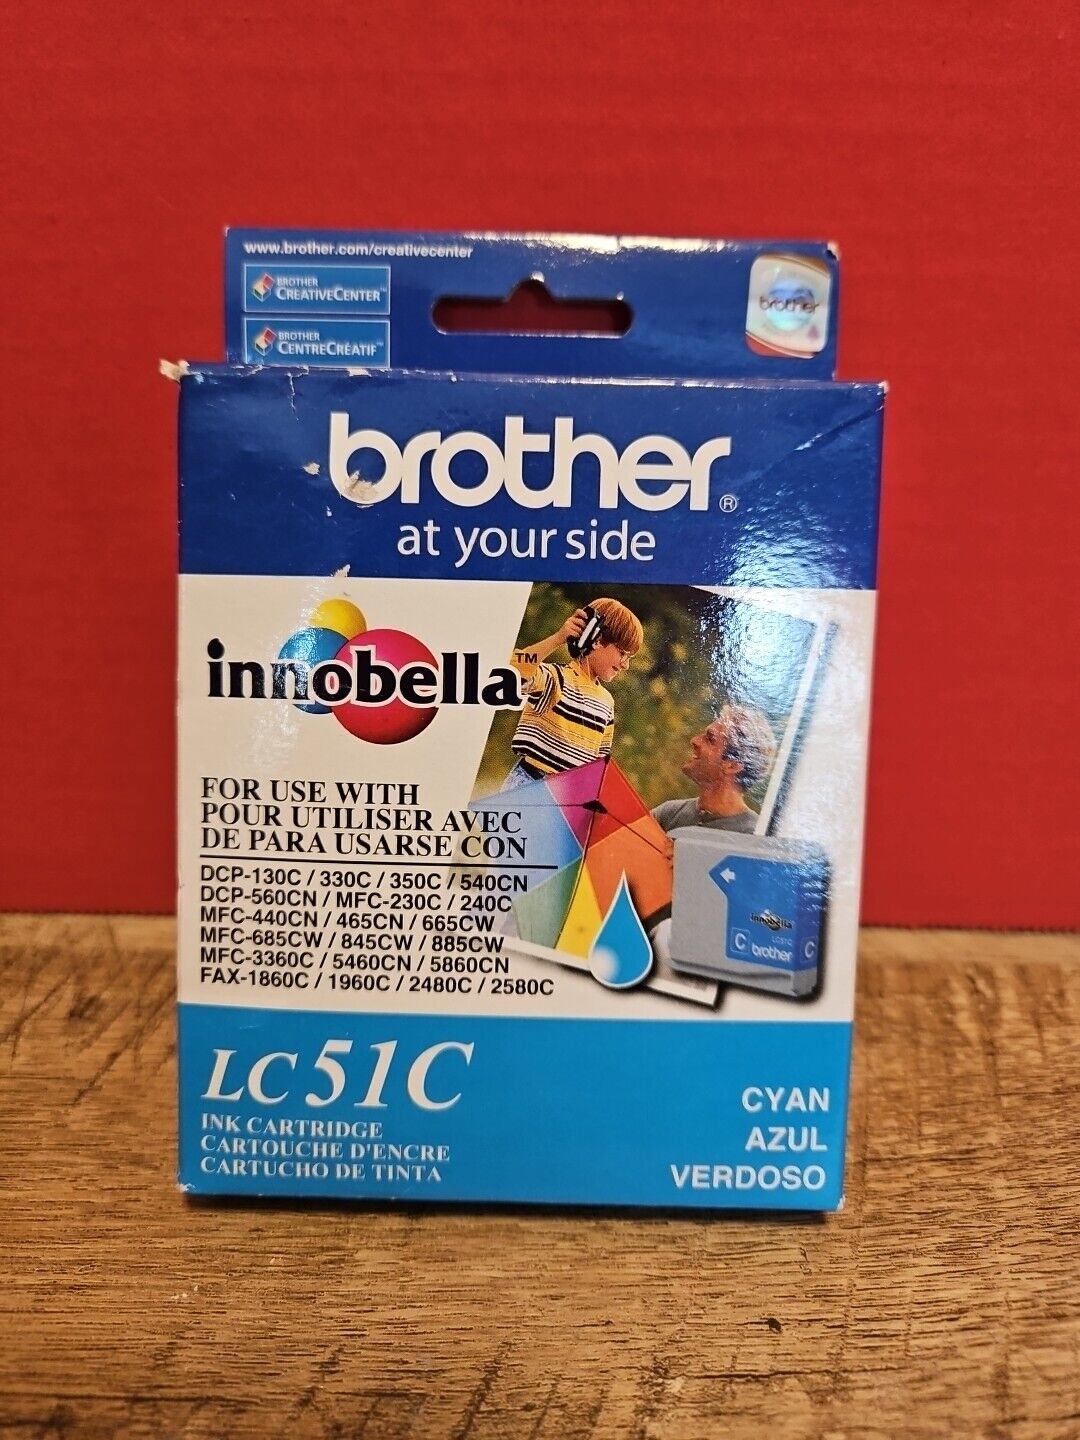 Brother Ink Cartridge LC51C, Cyan. Use Before Date: 09/2104